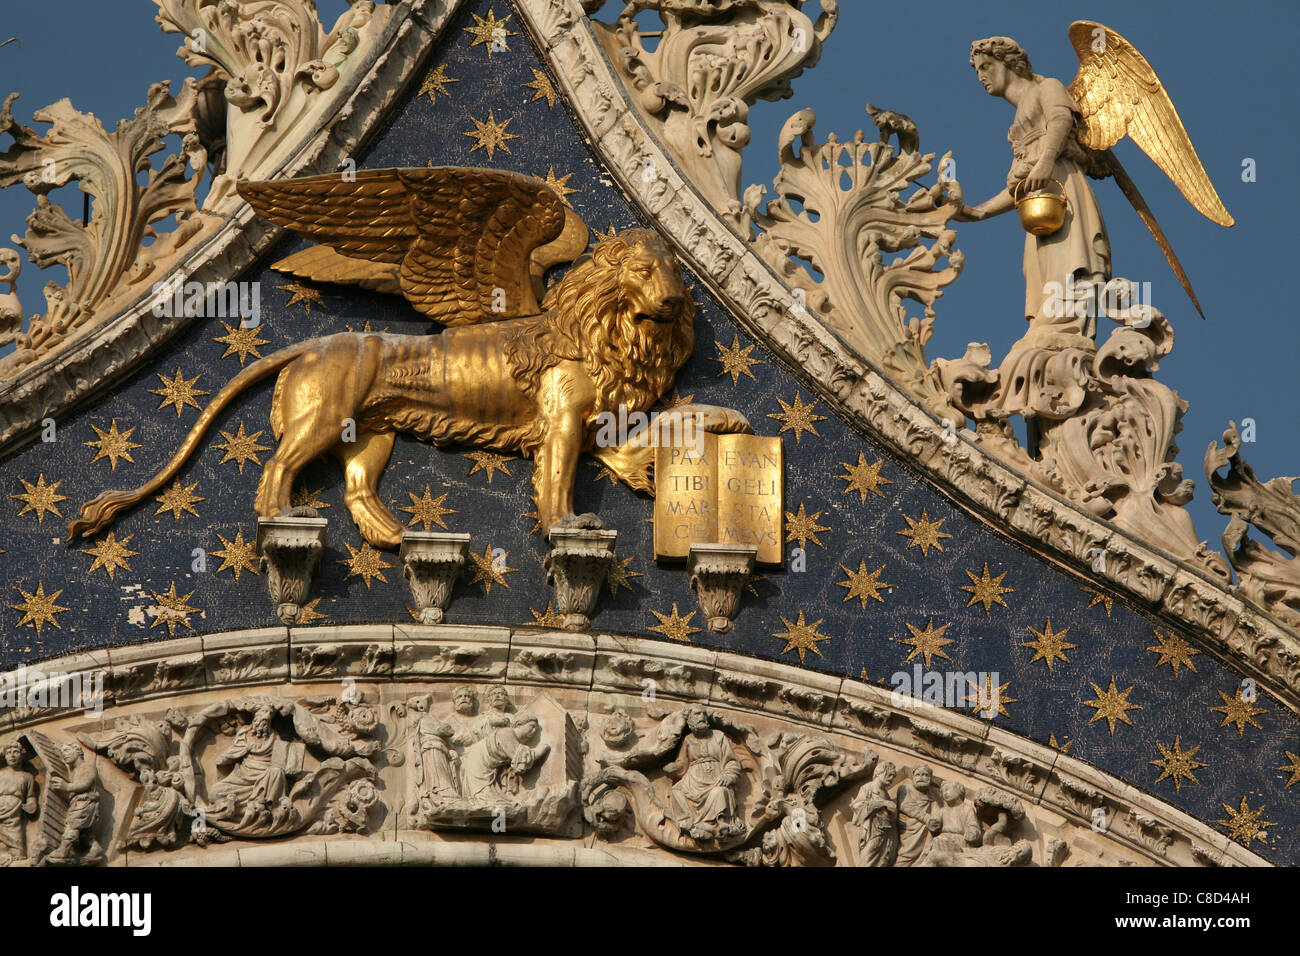 Lion of Saint Mark above the main gate of Saint Mark’s Basilica on Piazza San Marco in Venice, Italy. Stock Photo